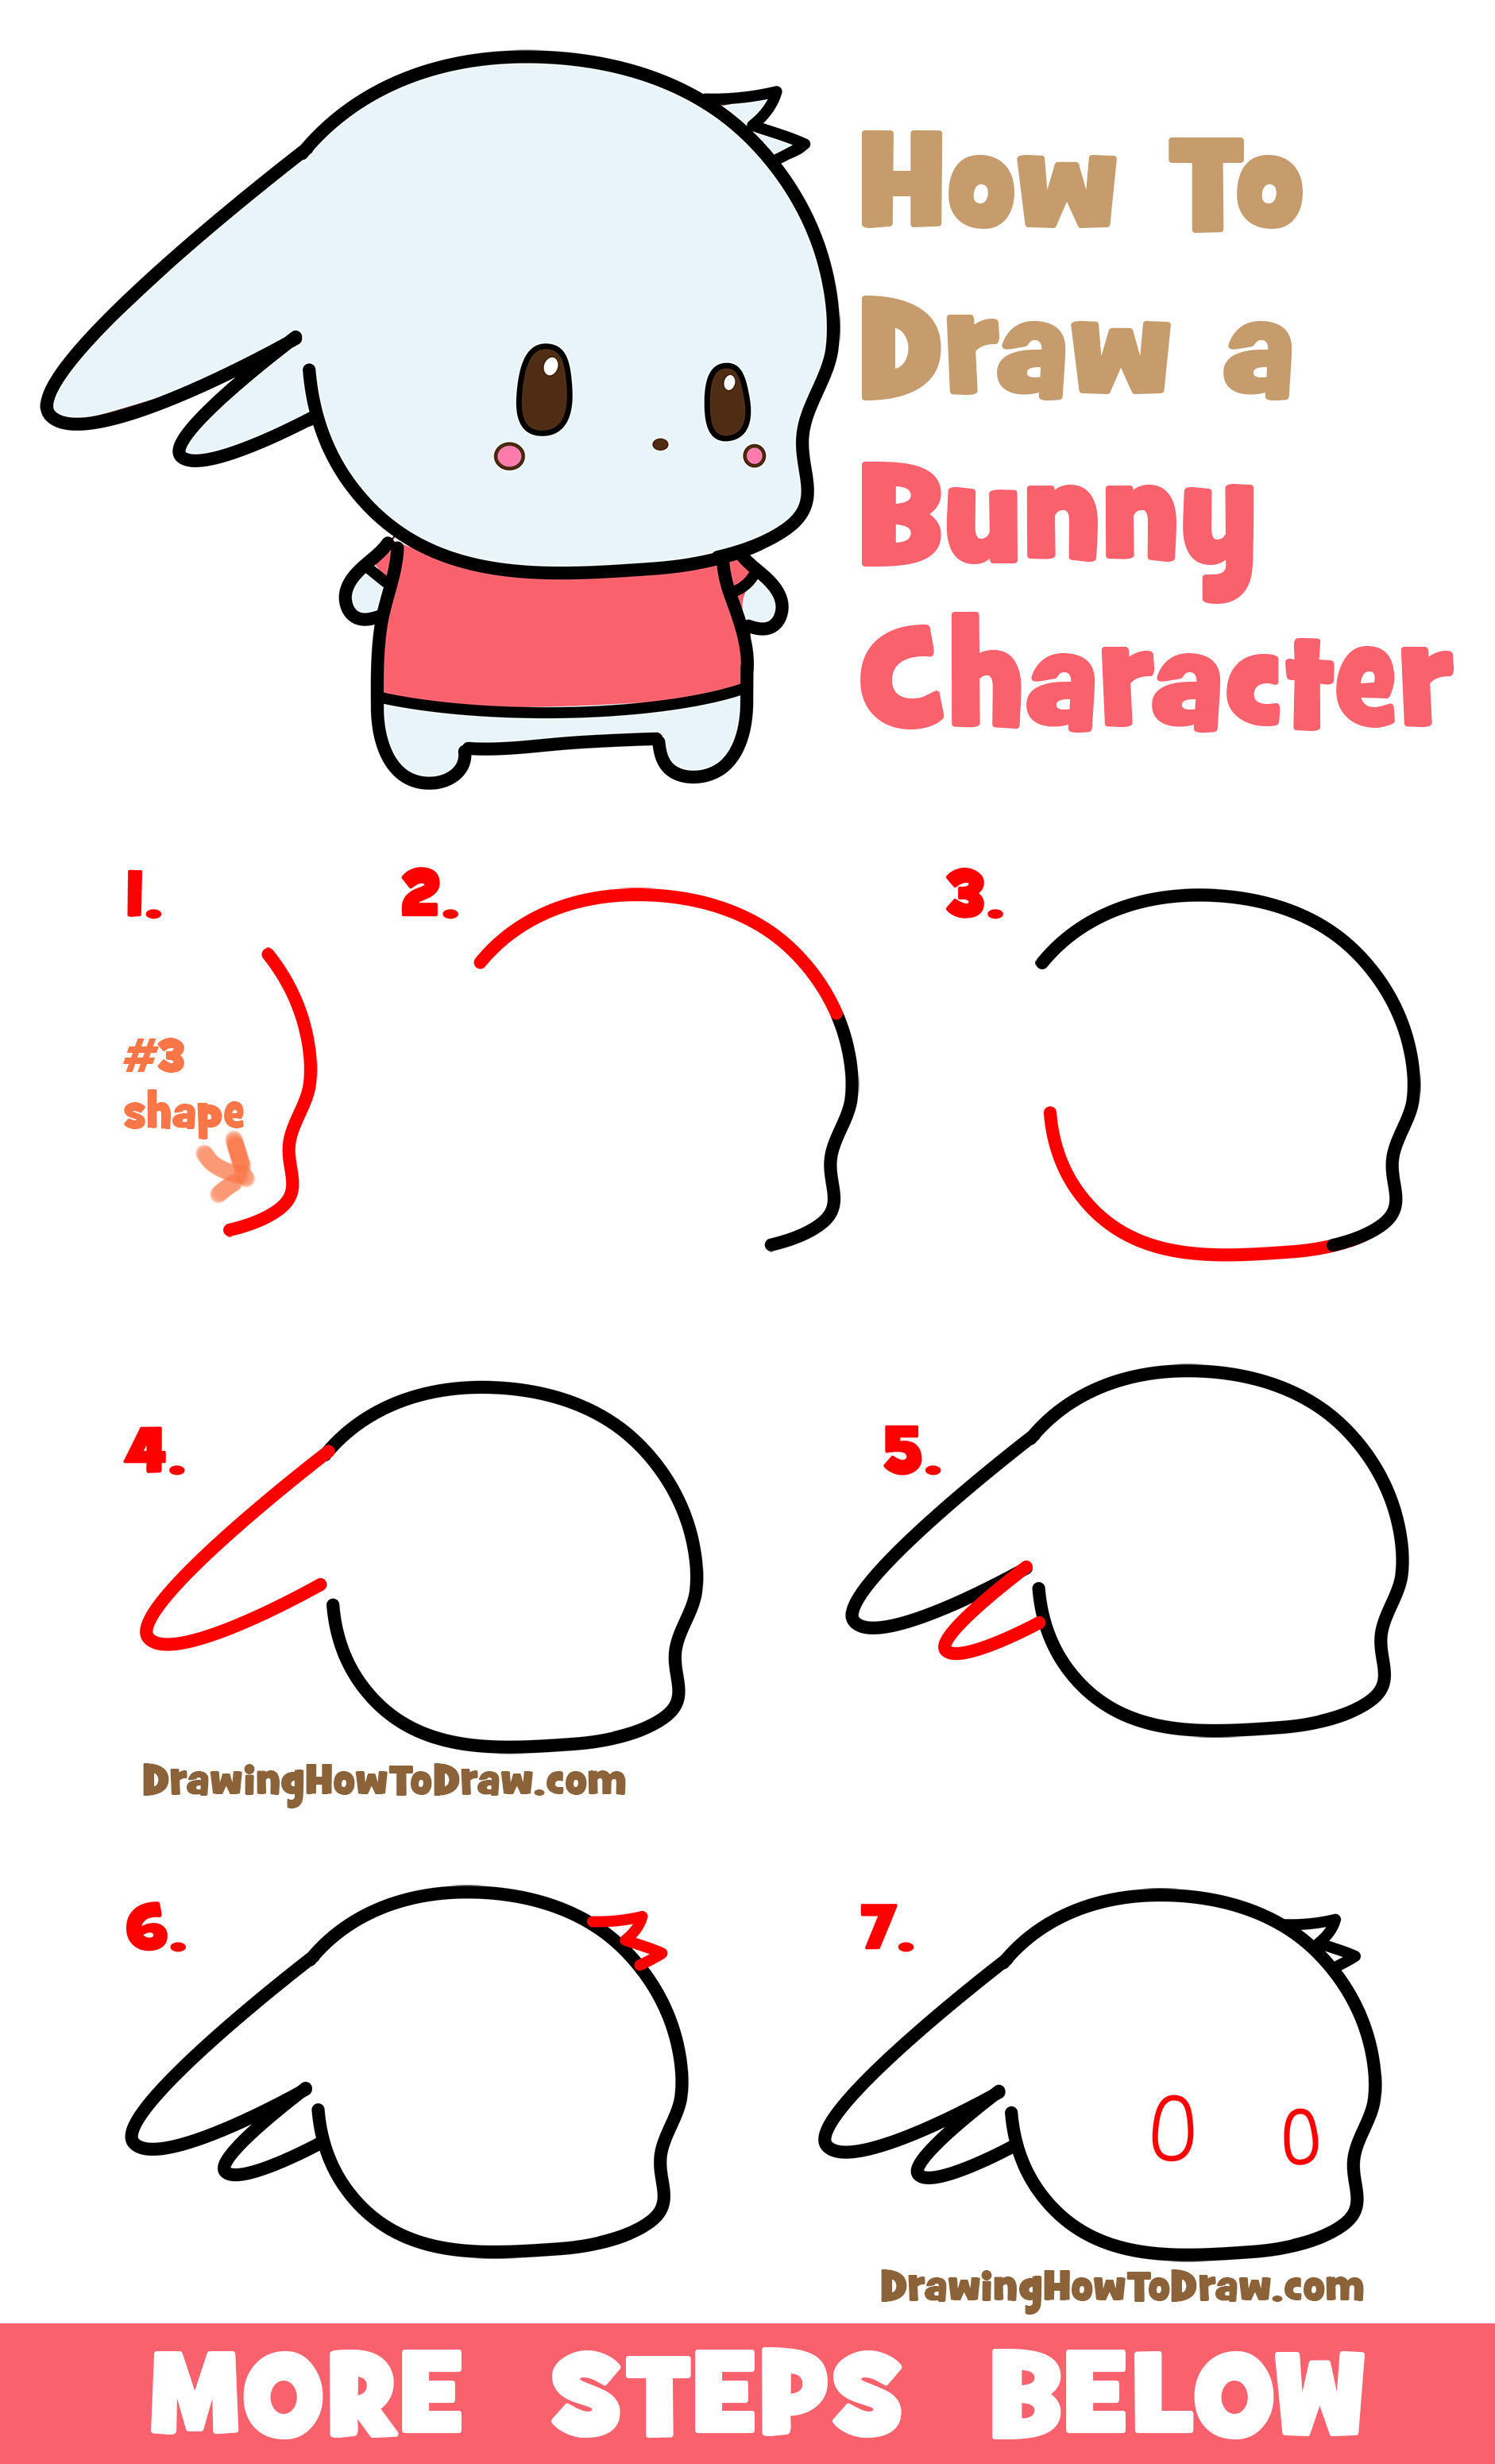 How to Draw Kawaii Animals: 4 Easy Step-by-step Tutorials